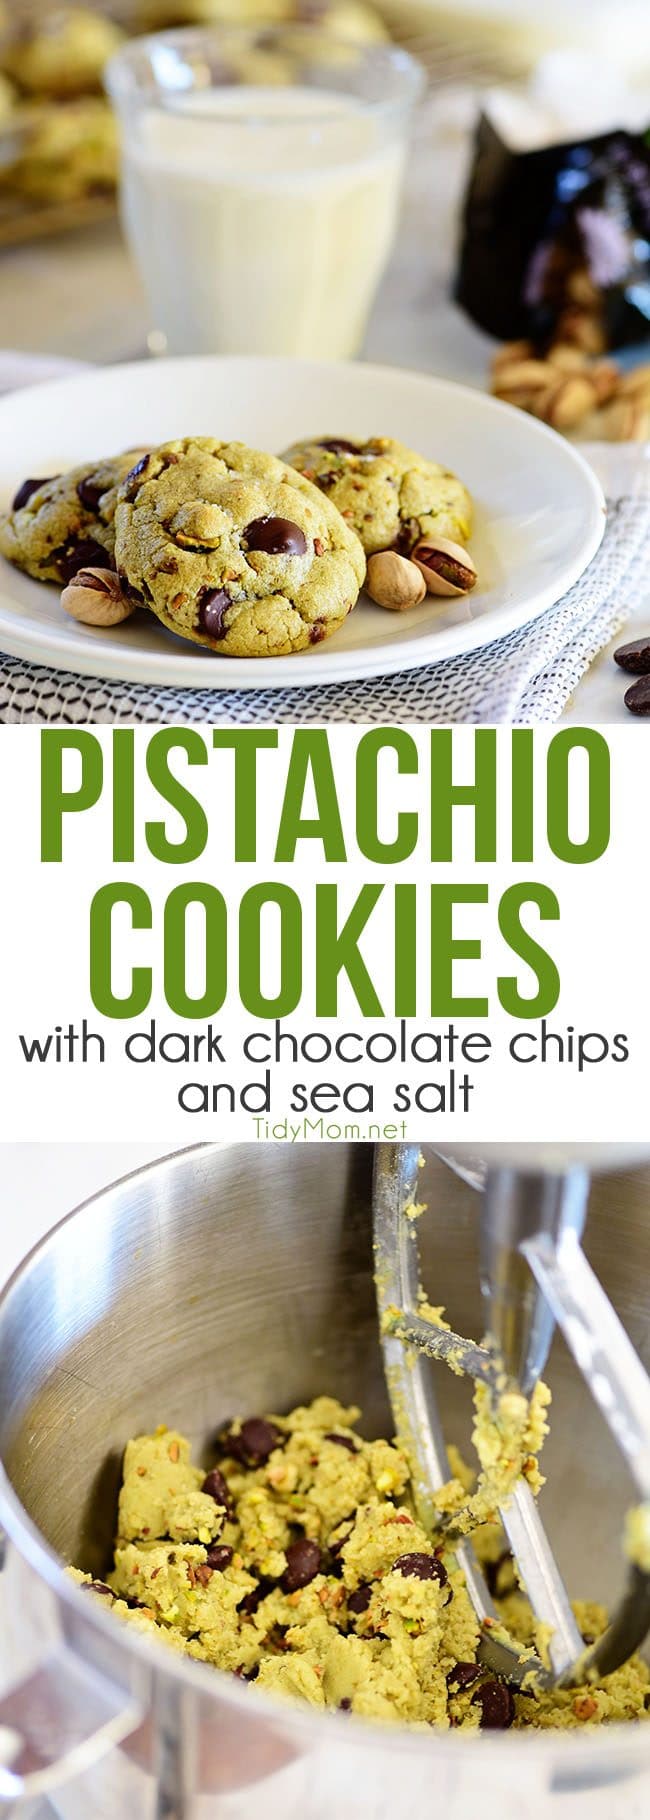 Pistachio cookies are sure to become a favorite! Perfect for St. Patricks Day, Easter, Christmas or any day. These deliciously soft pudding cookies are buttery and salty with dark chocolate chunks that pairs perfectly with chopped pistachios. I bet you can’t eat just one! Get the full printable recipe at TidyMom.net